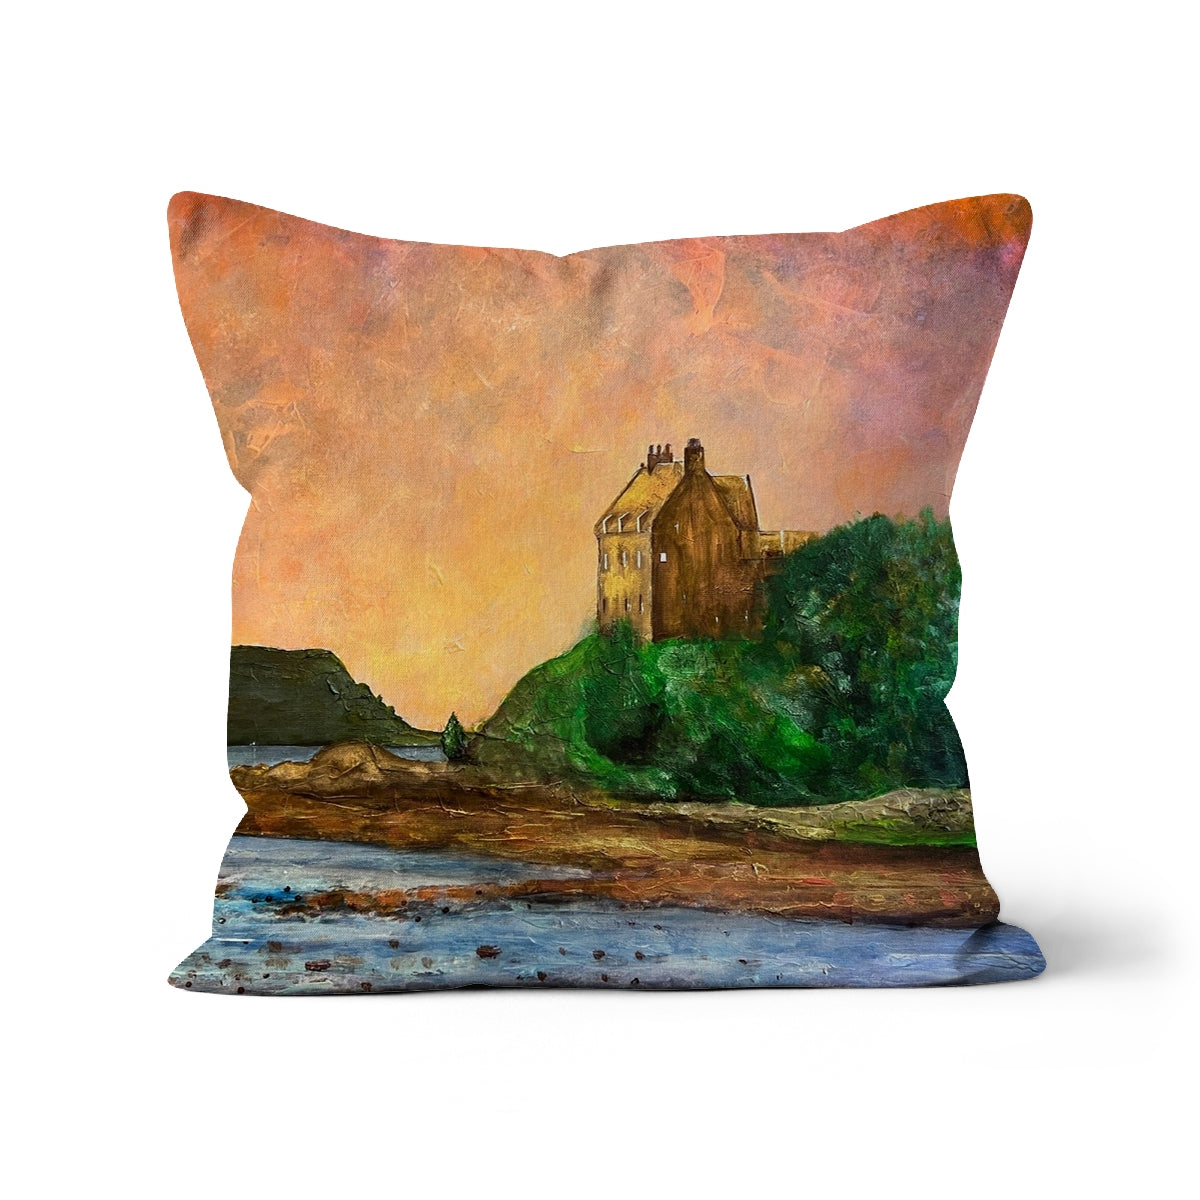 Duntrune Castle Art Gifts Cushion-Cushions-Historic & Iconic Scotland Art Gallery-Canvas-16"x16"-Paintings, Prints, Homeware, Art Gifts From Scotland By Scottish Artist Kevin Hunter